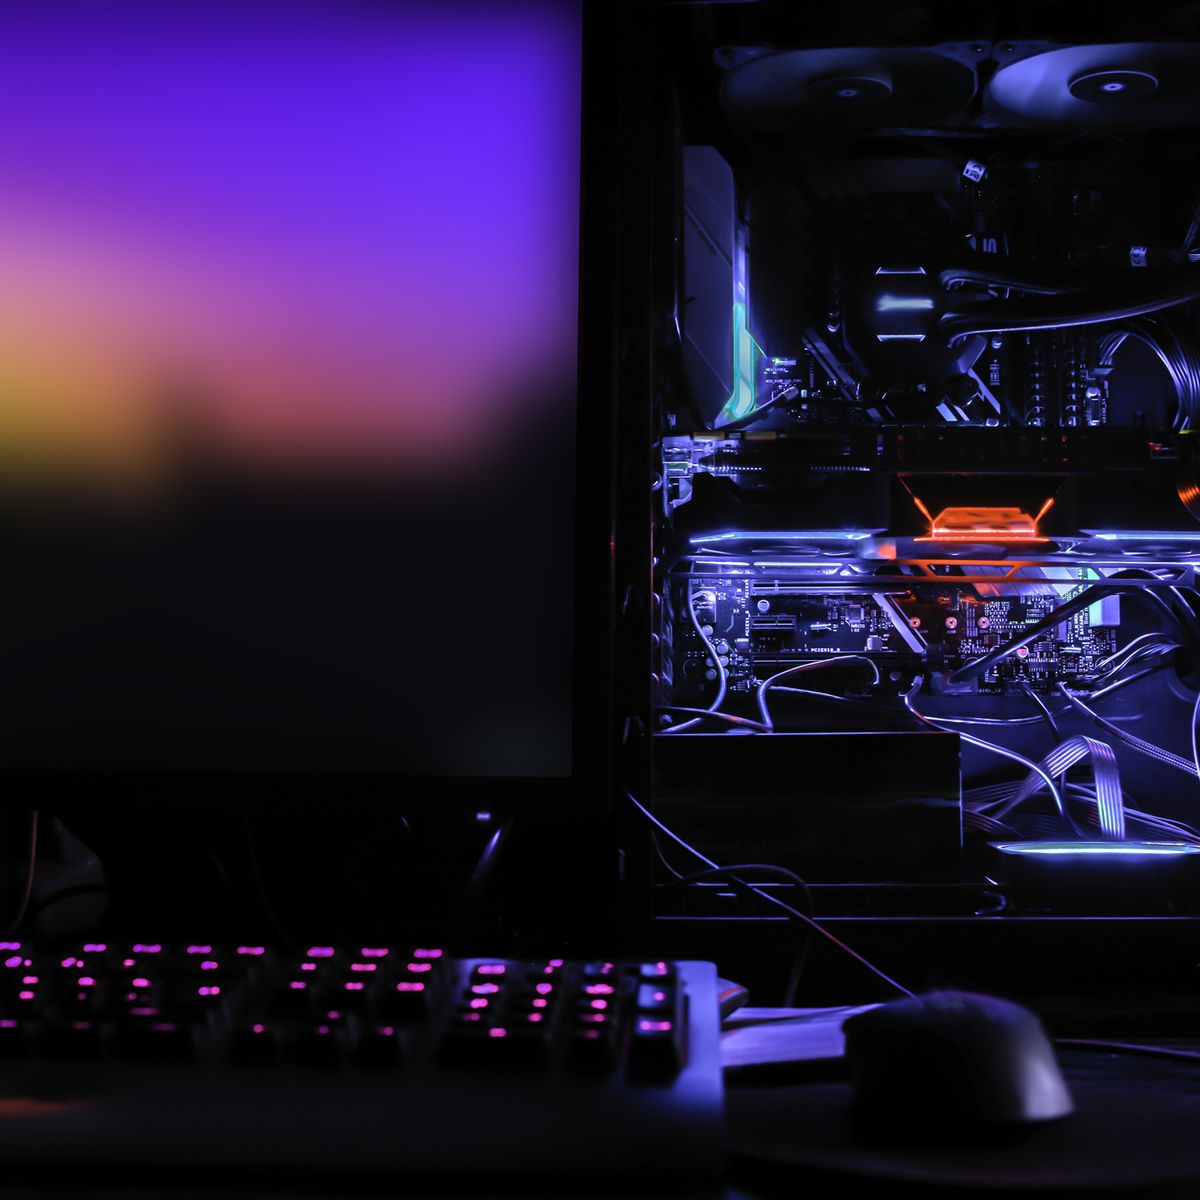 What Gaming PCs Do rs Use? - TrinWare